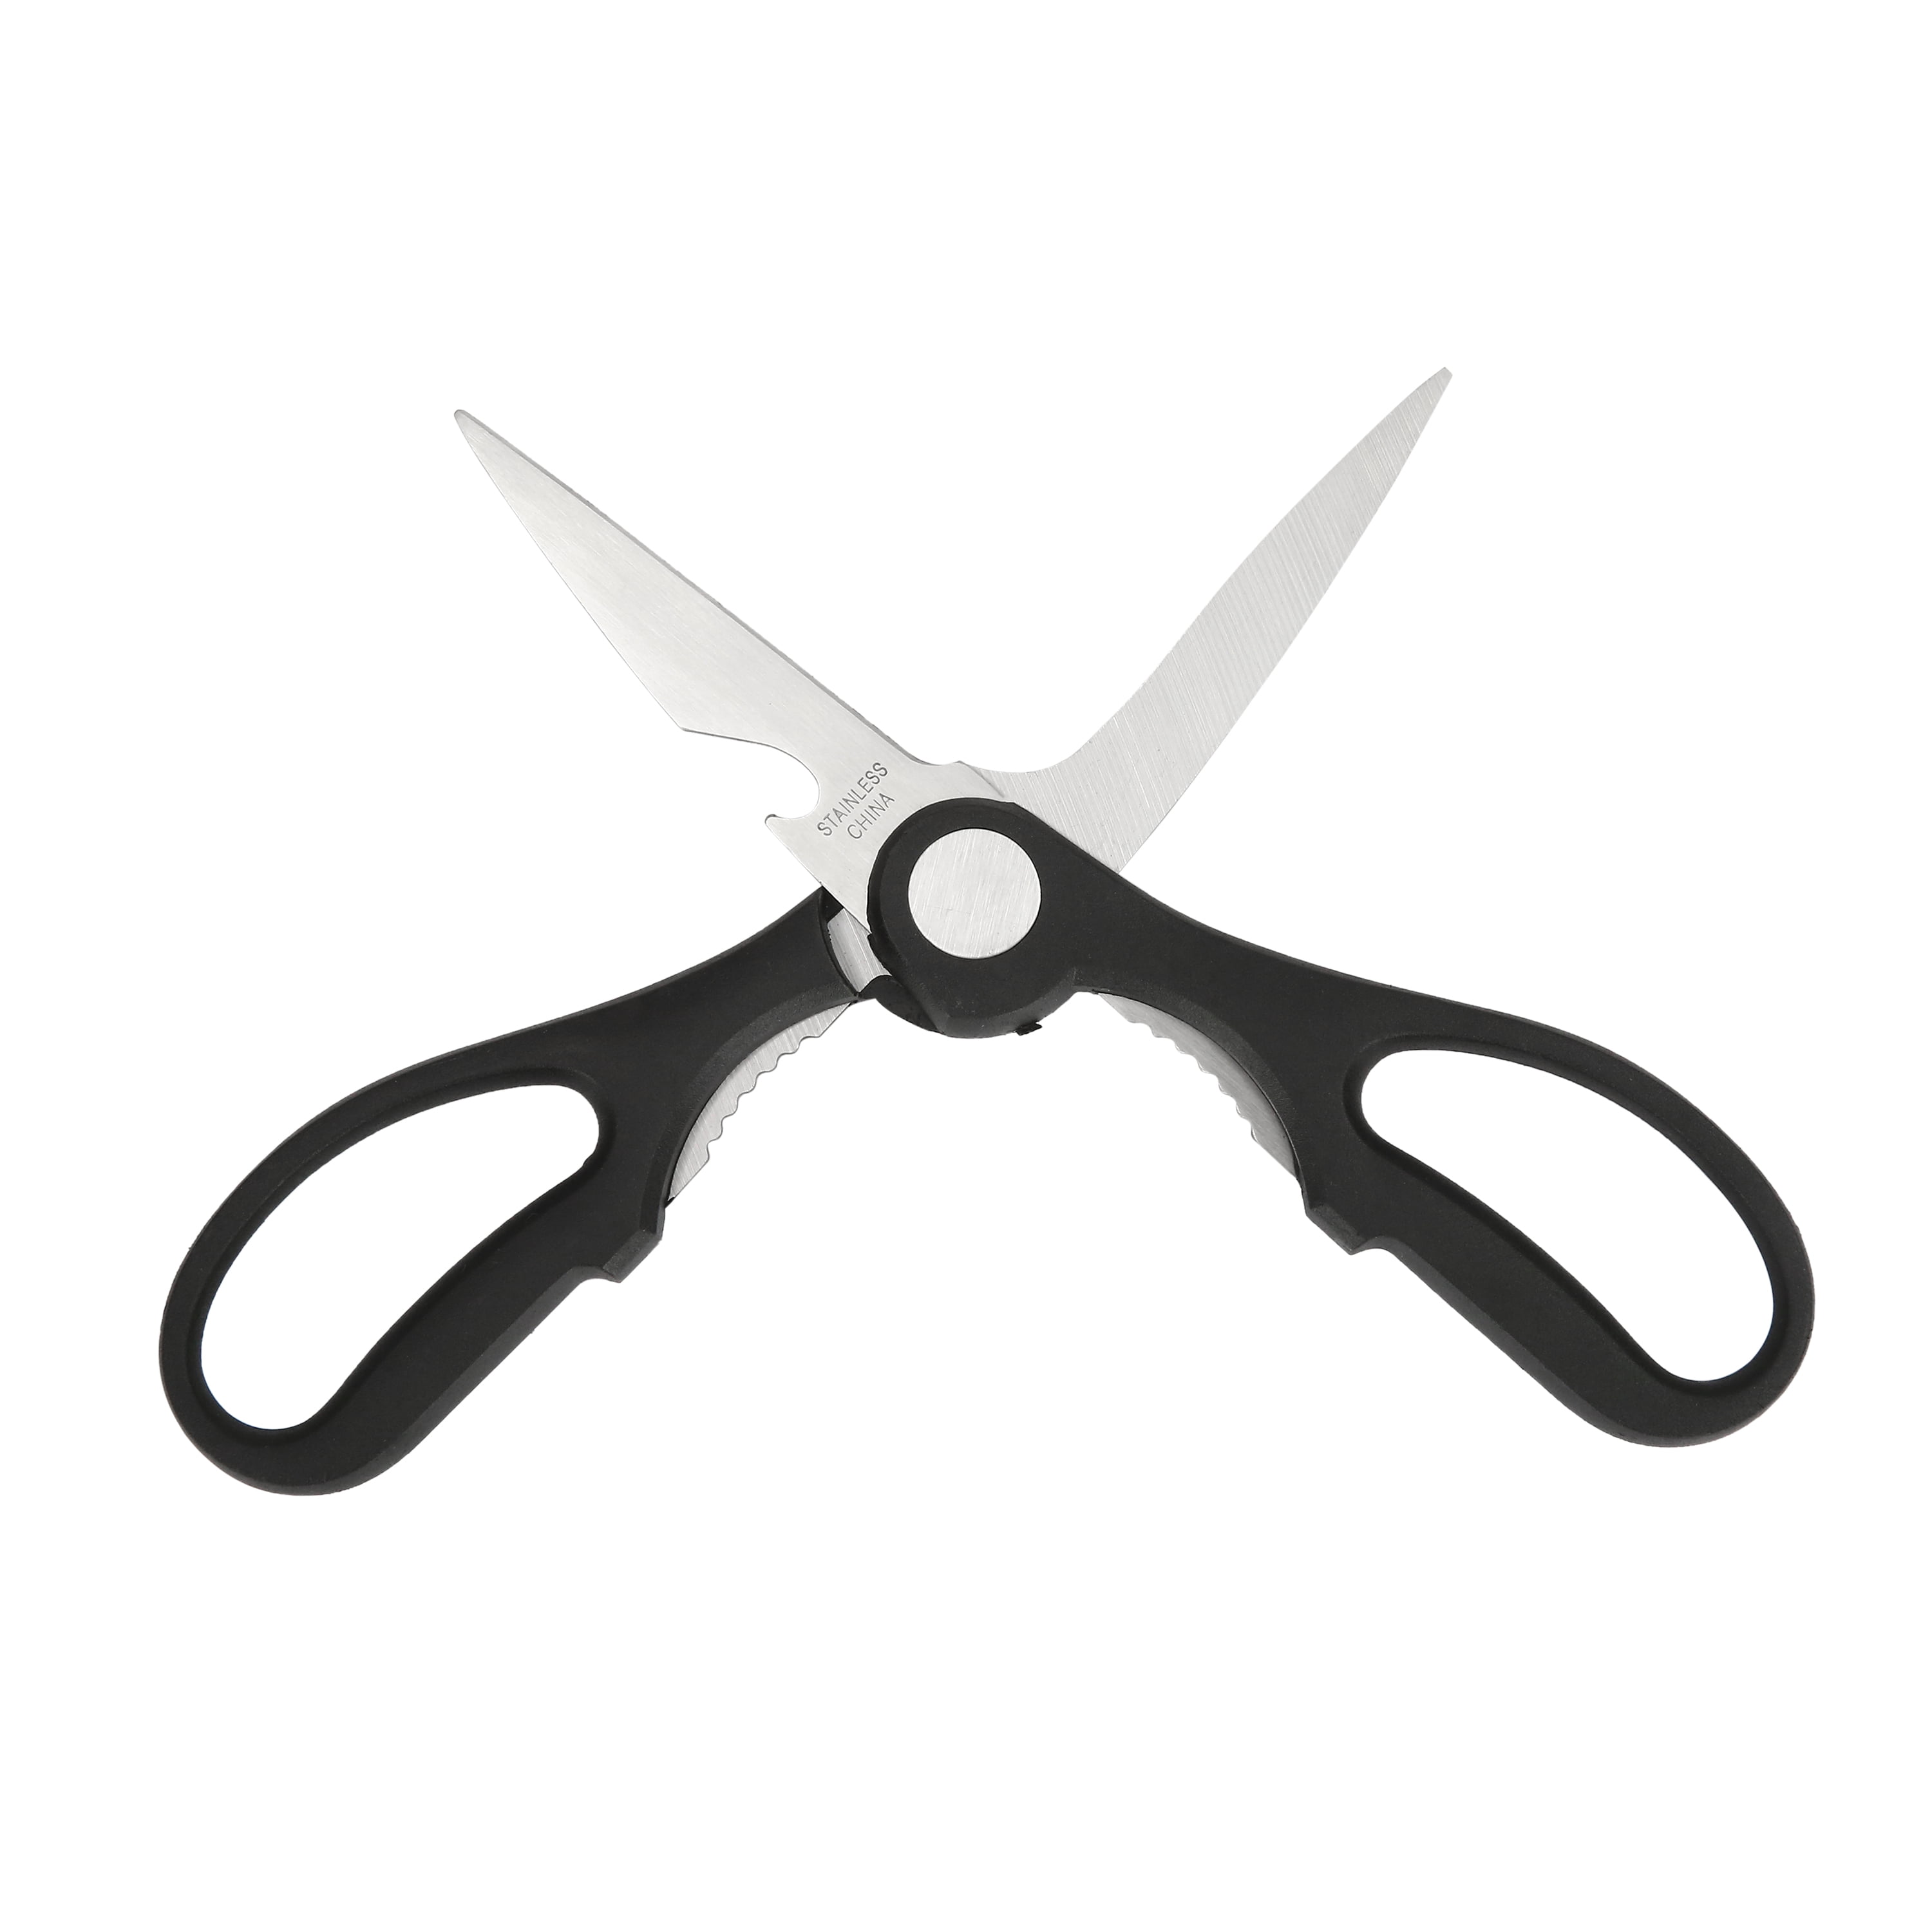 Fine Science Tools Utility Scissors, Stainless Steel, Straight, 21